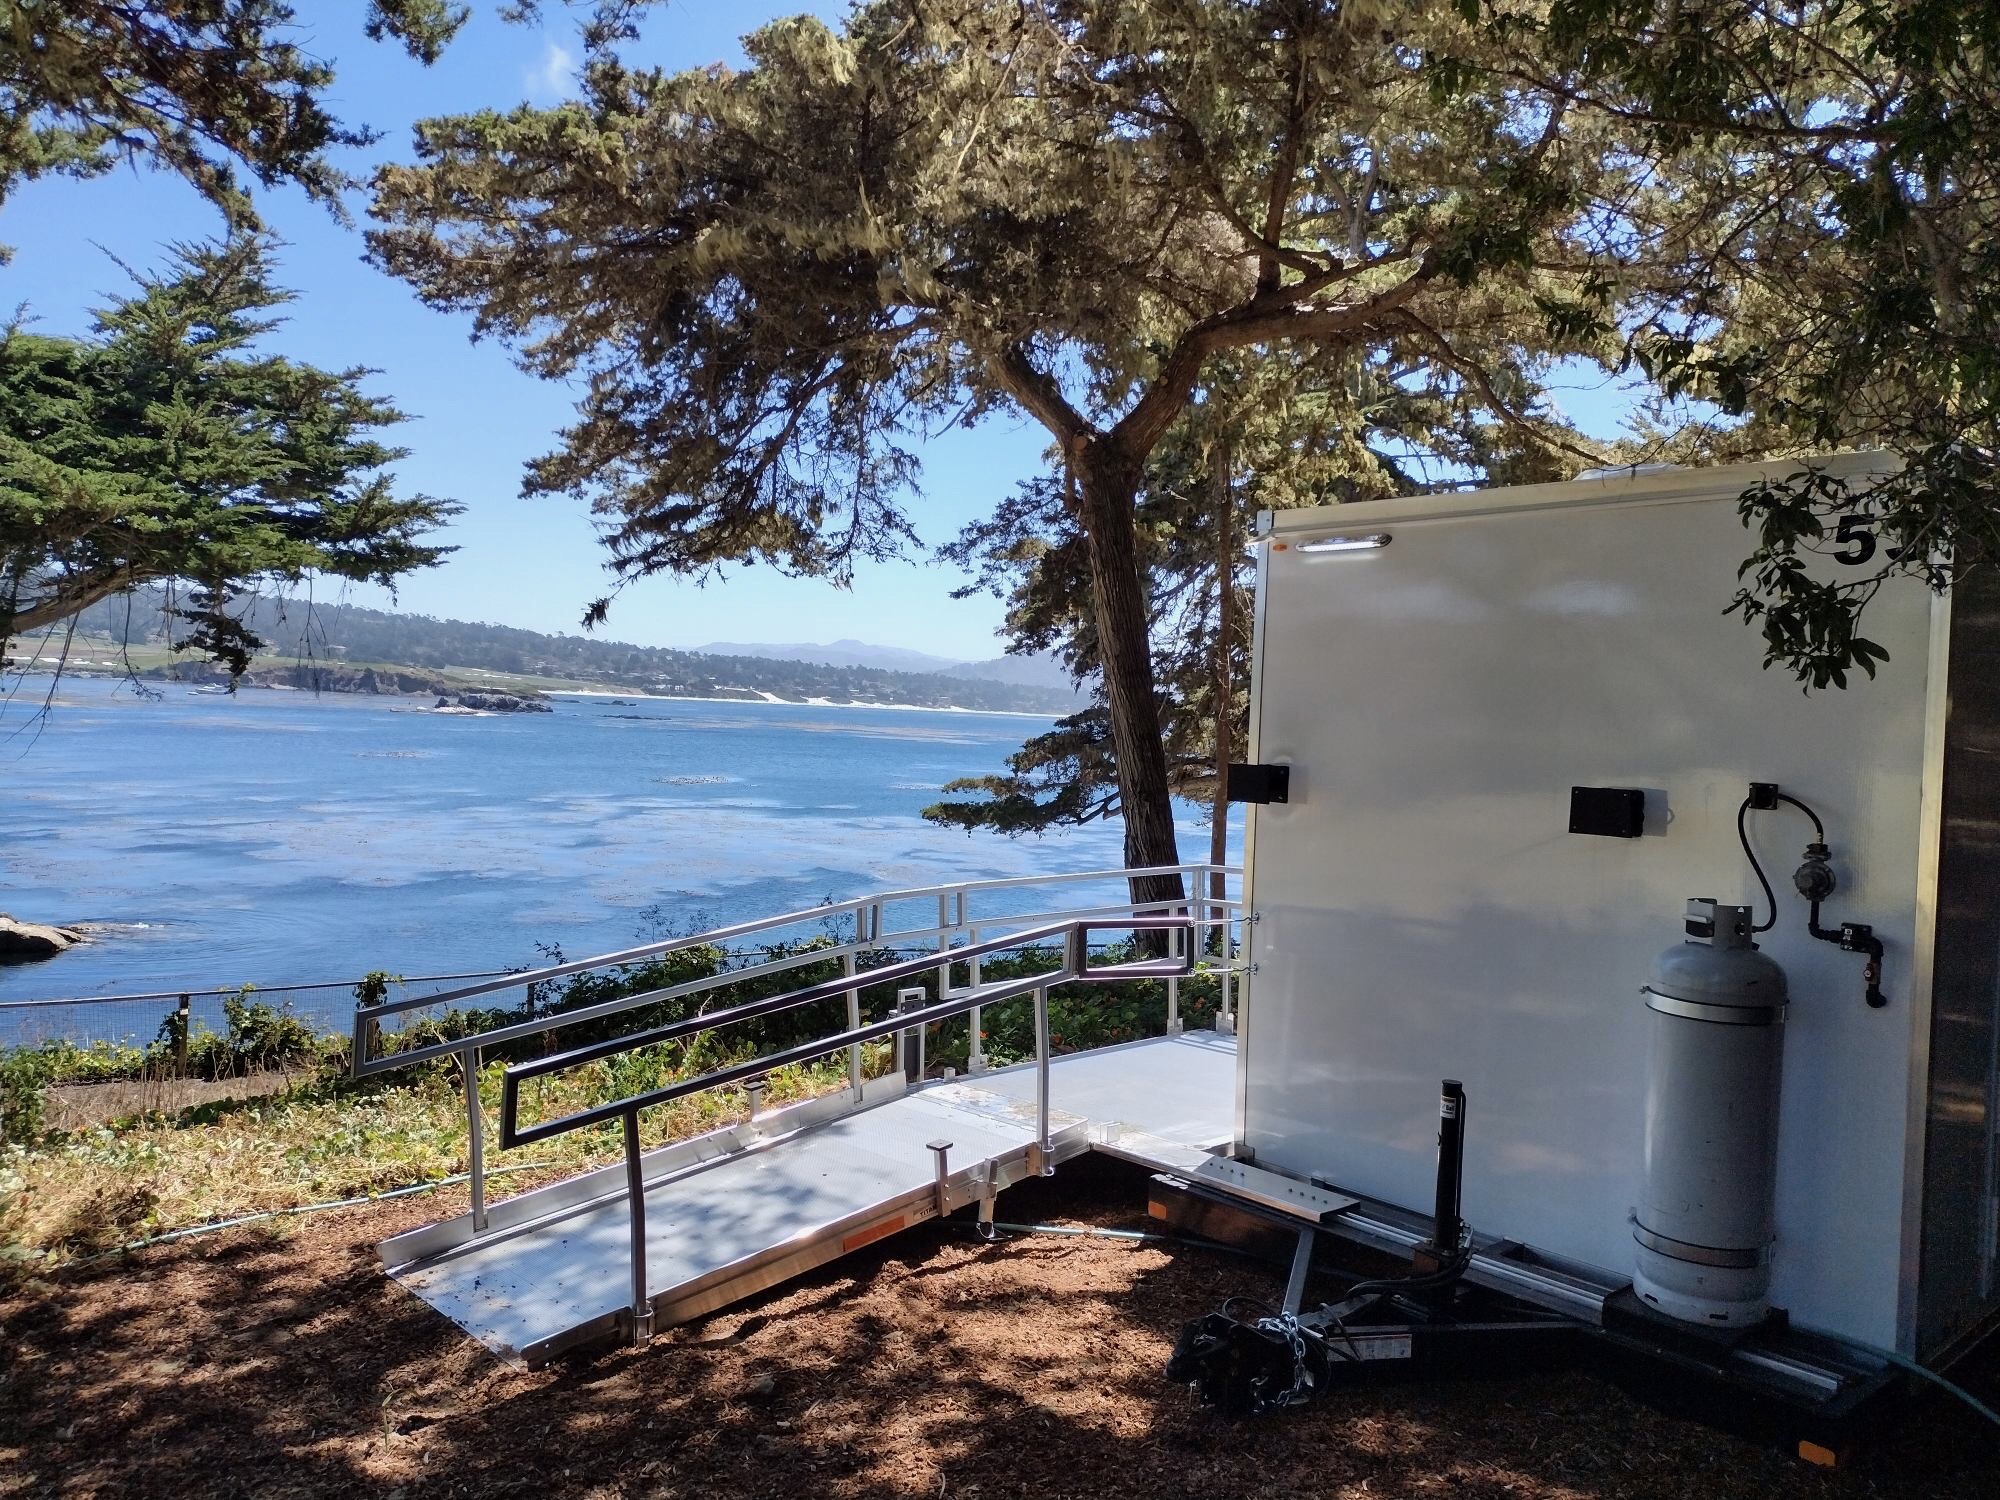 ADA Shower Trailer at the coast  - The Lavatory Nor Cal